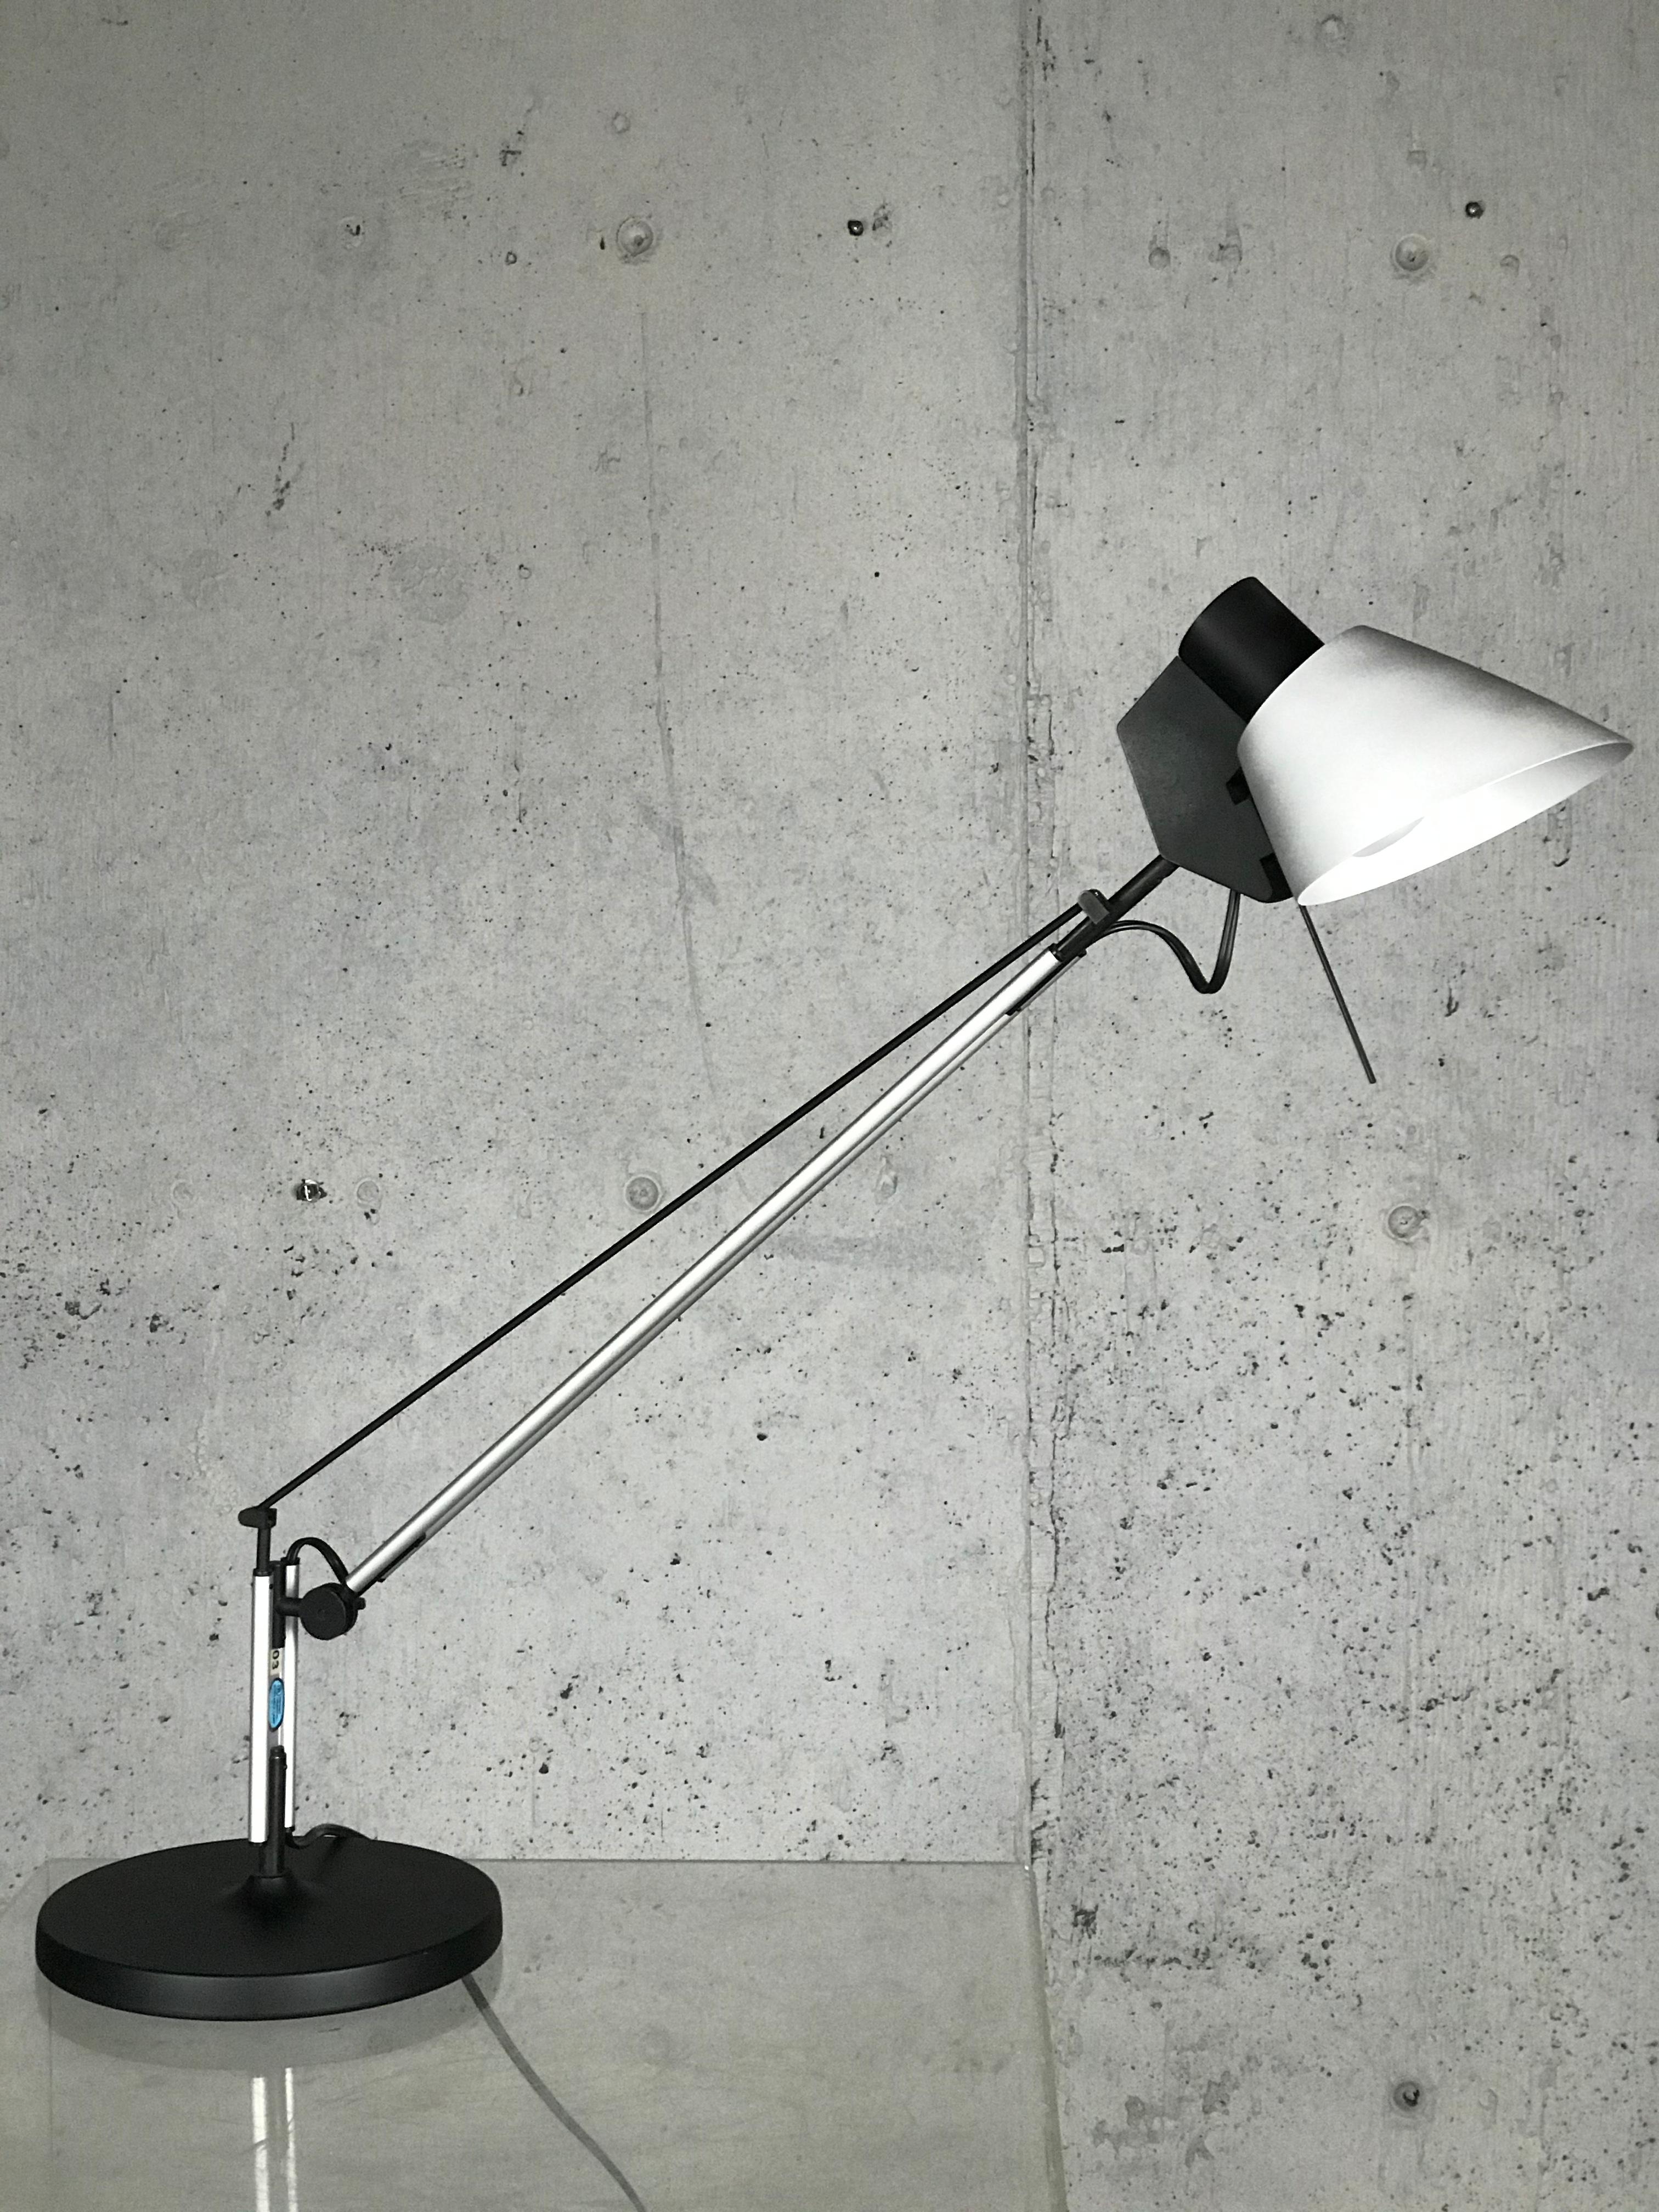 Vintage 1970s-1980s Italian modern architectural Italian desk lamp by Mario Barbaglia & Joe Colombo for Italiana Luce. The lamp articulates in many directions, up and down, side to side, as does the shade and head. Works great. Metal base. Signed